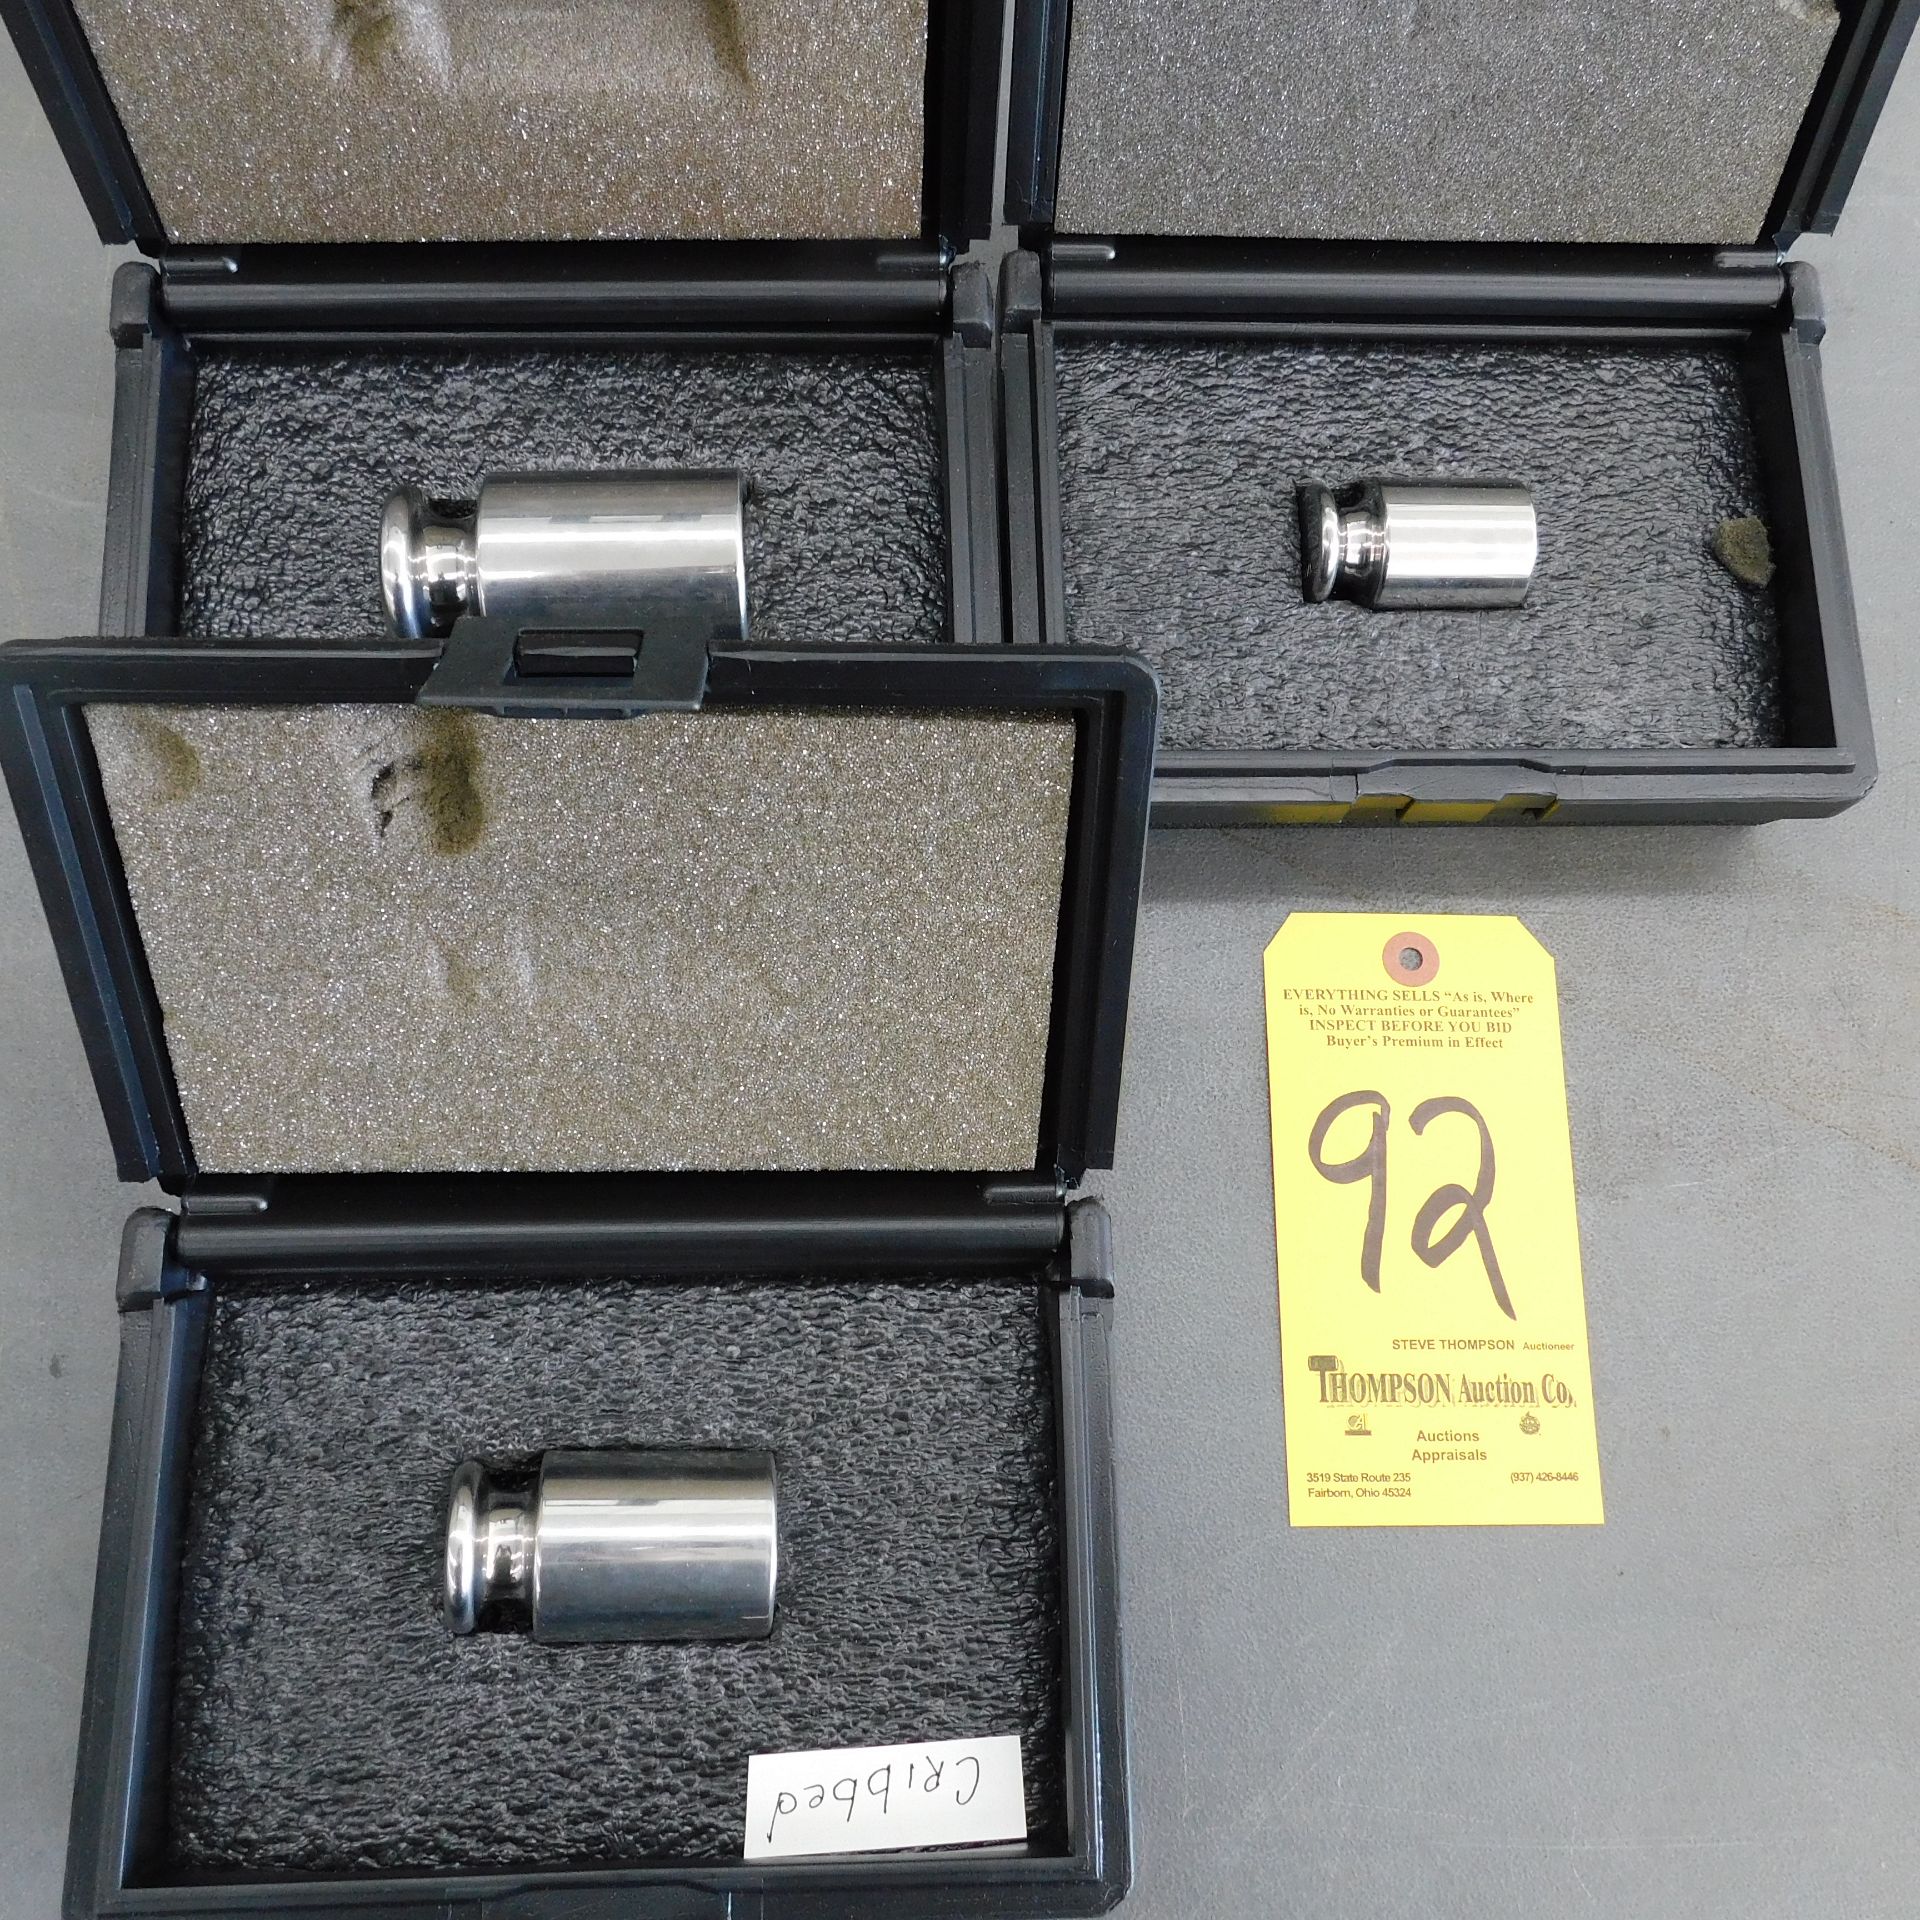 (3) Denver Instruments Gage Weights, 100g, 500g, and 300g